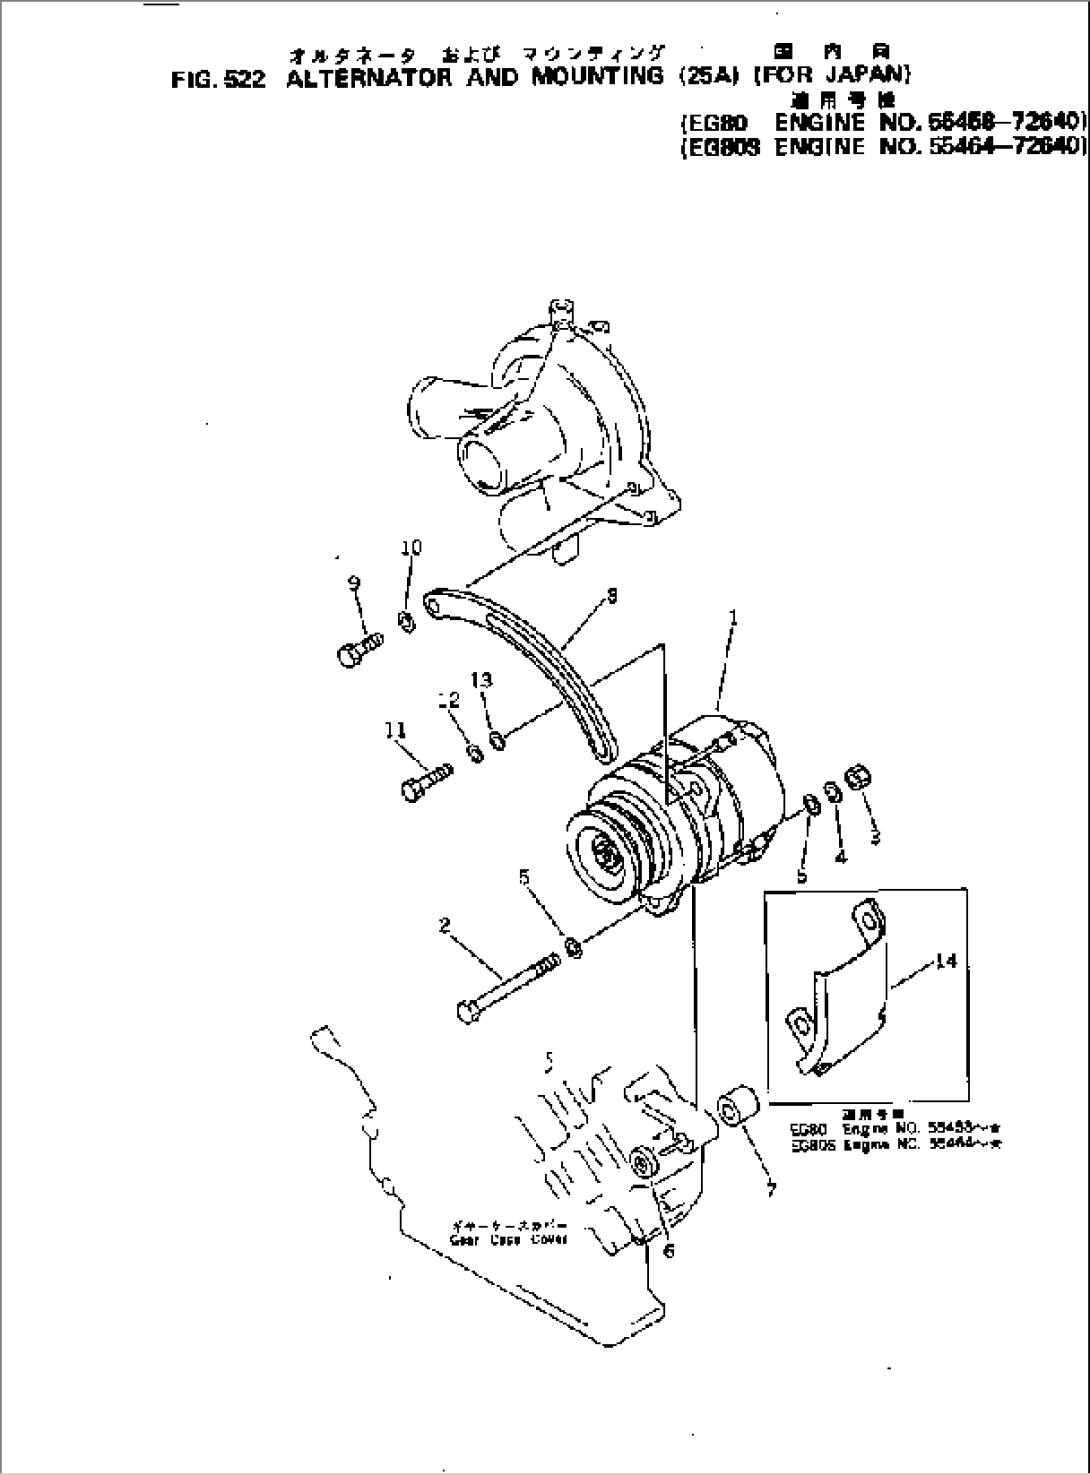 ALTERNATOR AND MOUNTING (25A)(#55458-72640)